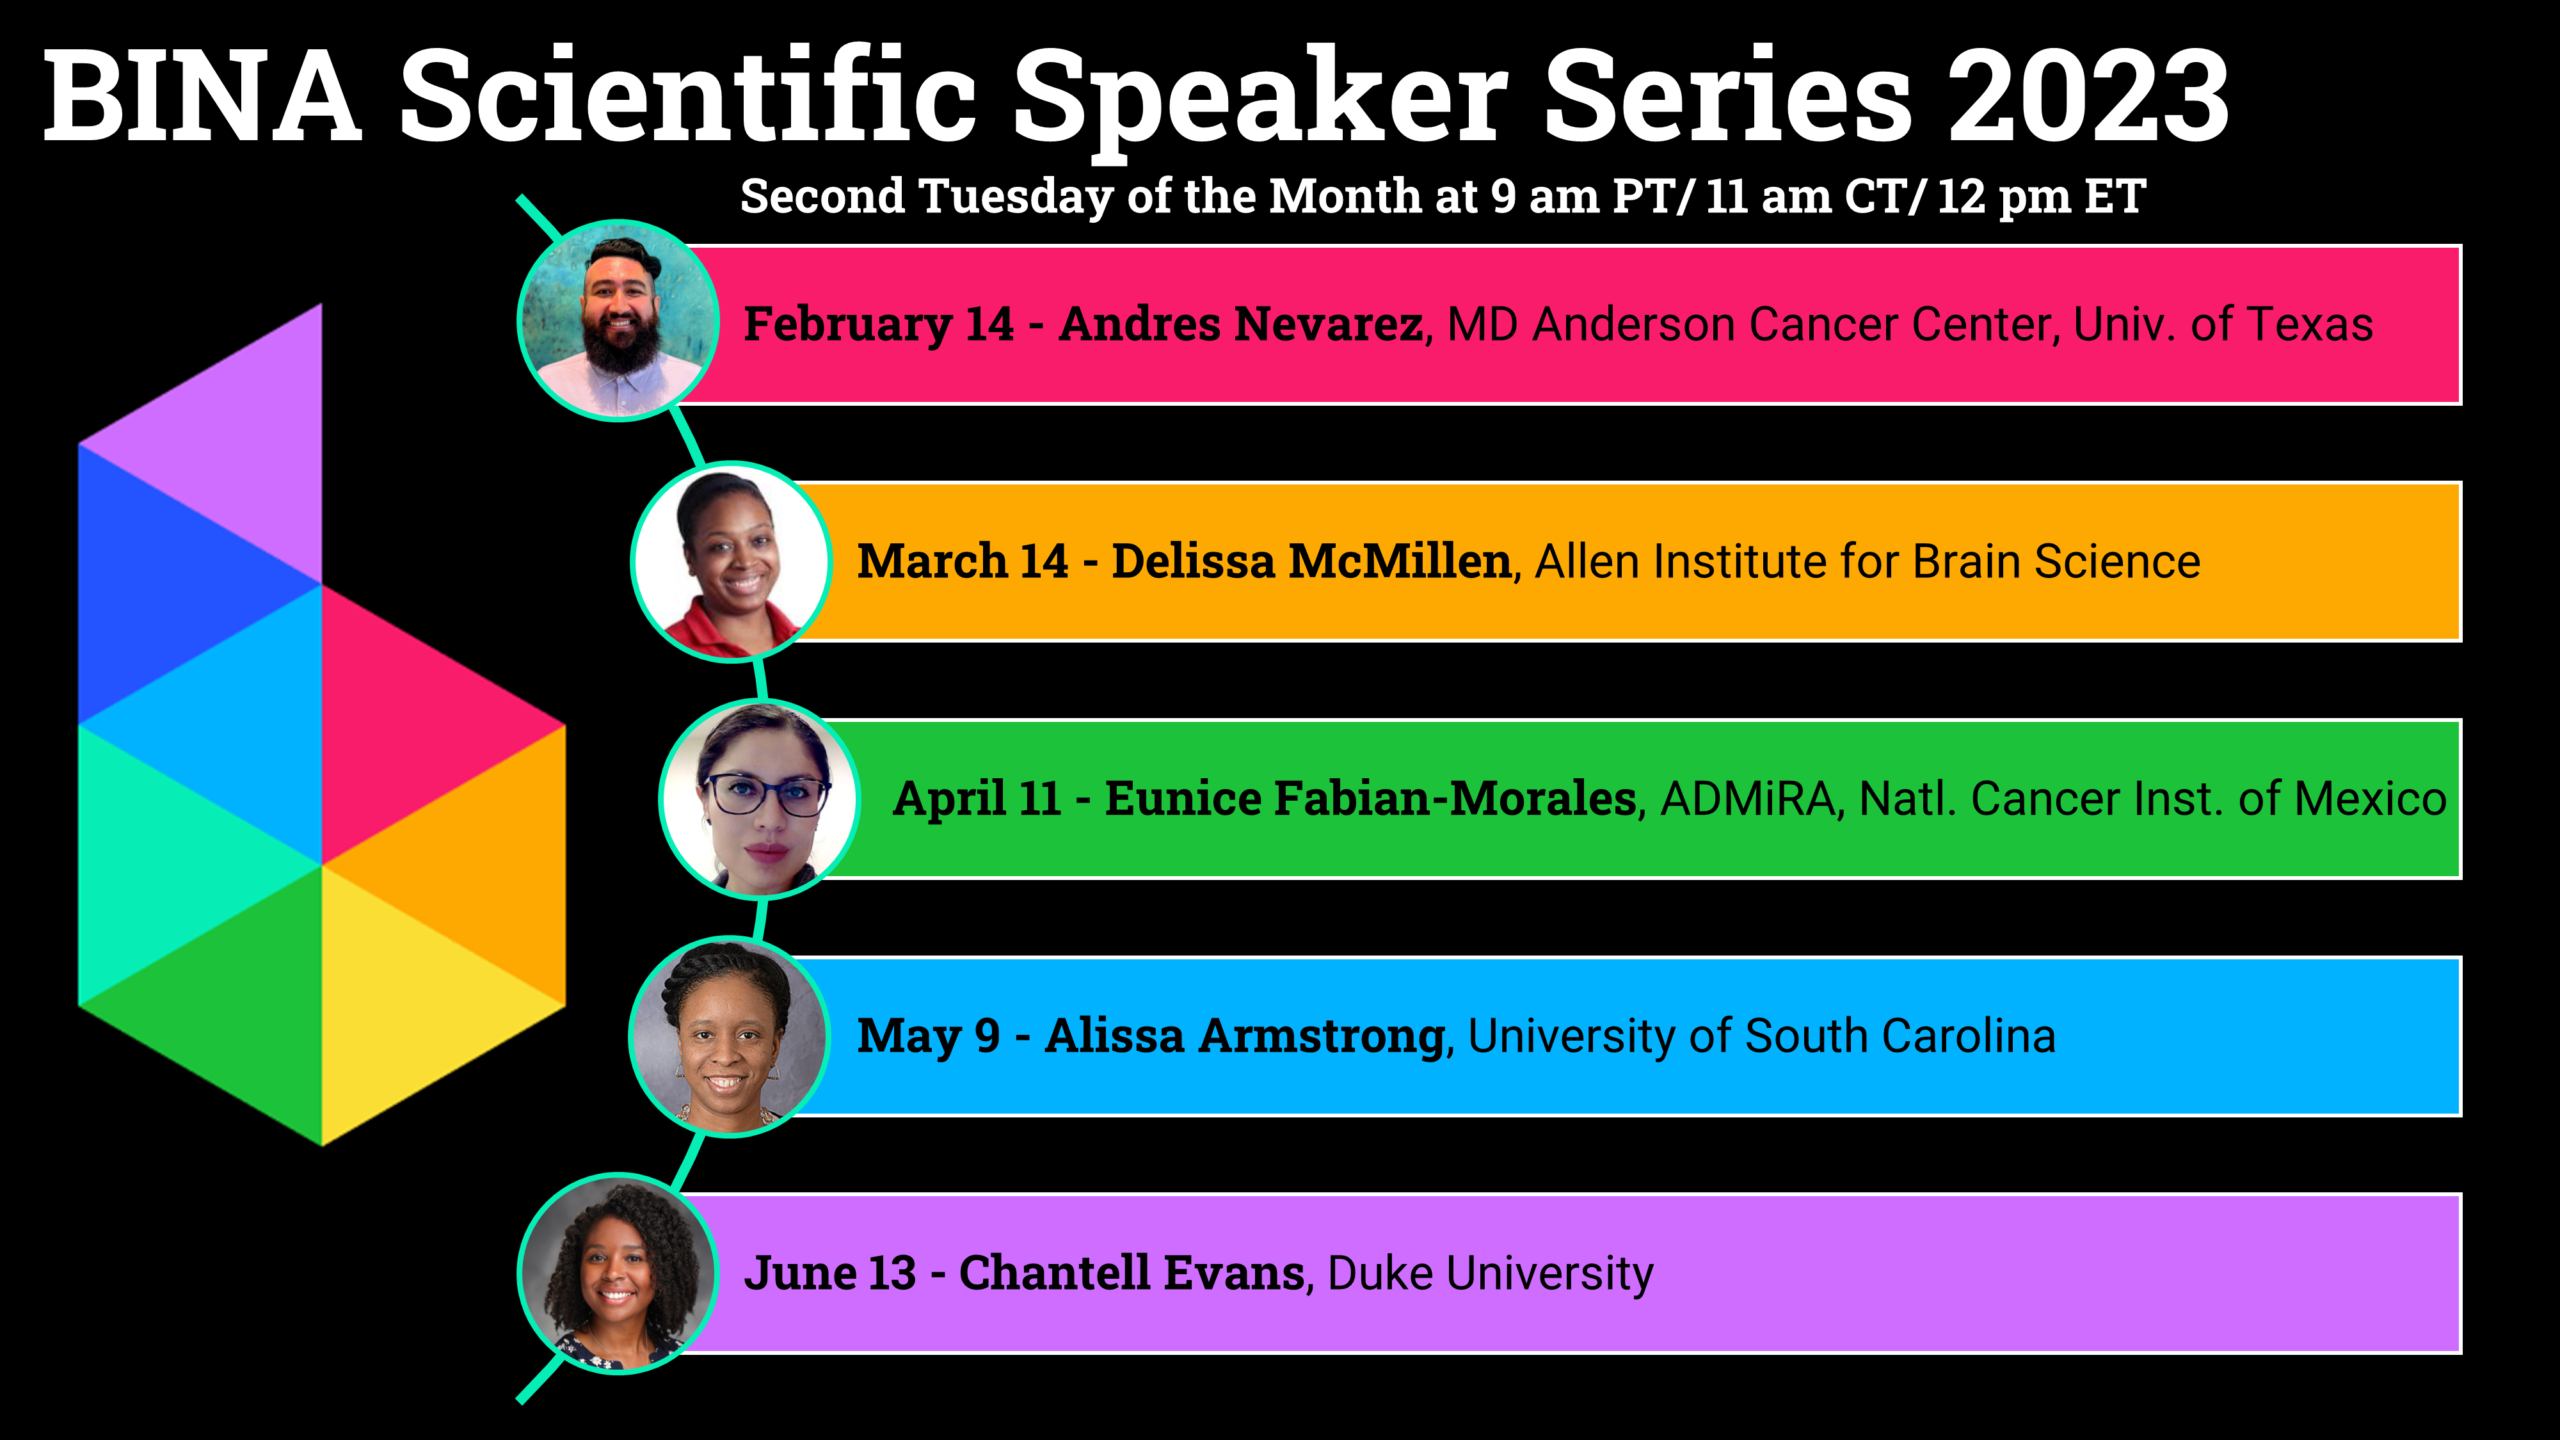 Flyer for speaker series happening the Second Tuesday of the month at 11 am Central